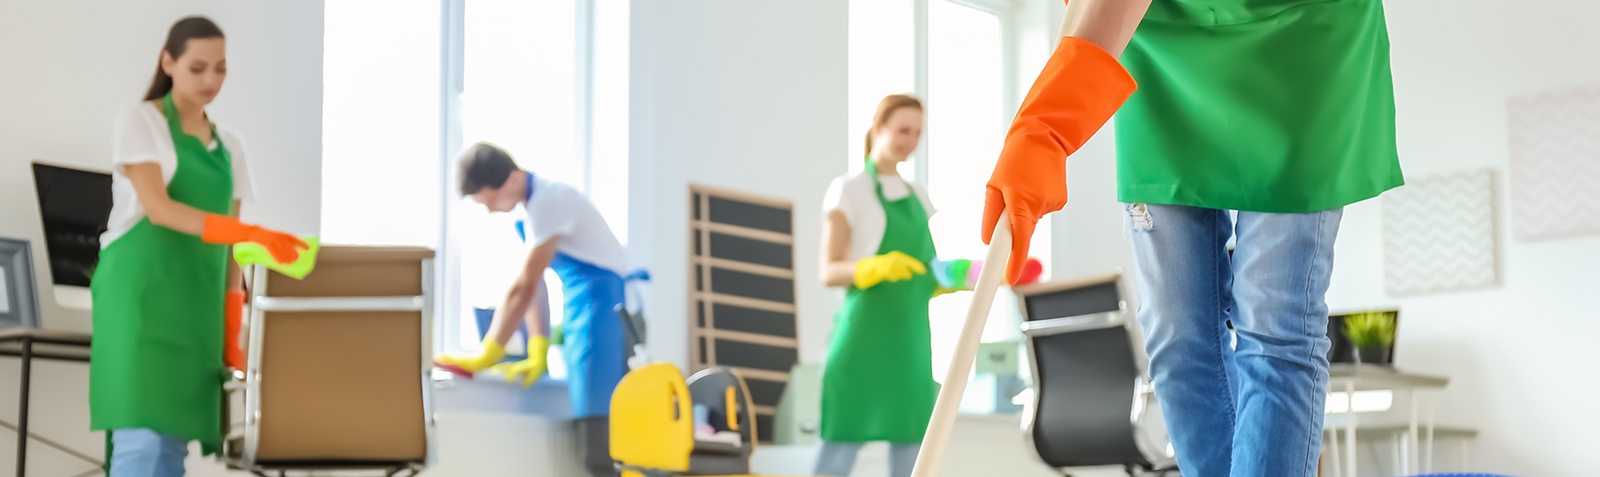 Reliable Commercial/ Office Cleaners serving Langley, BC